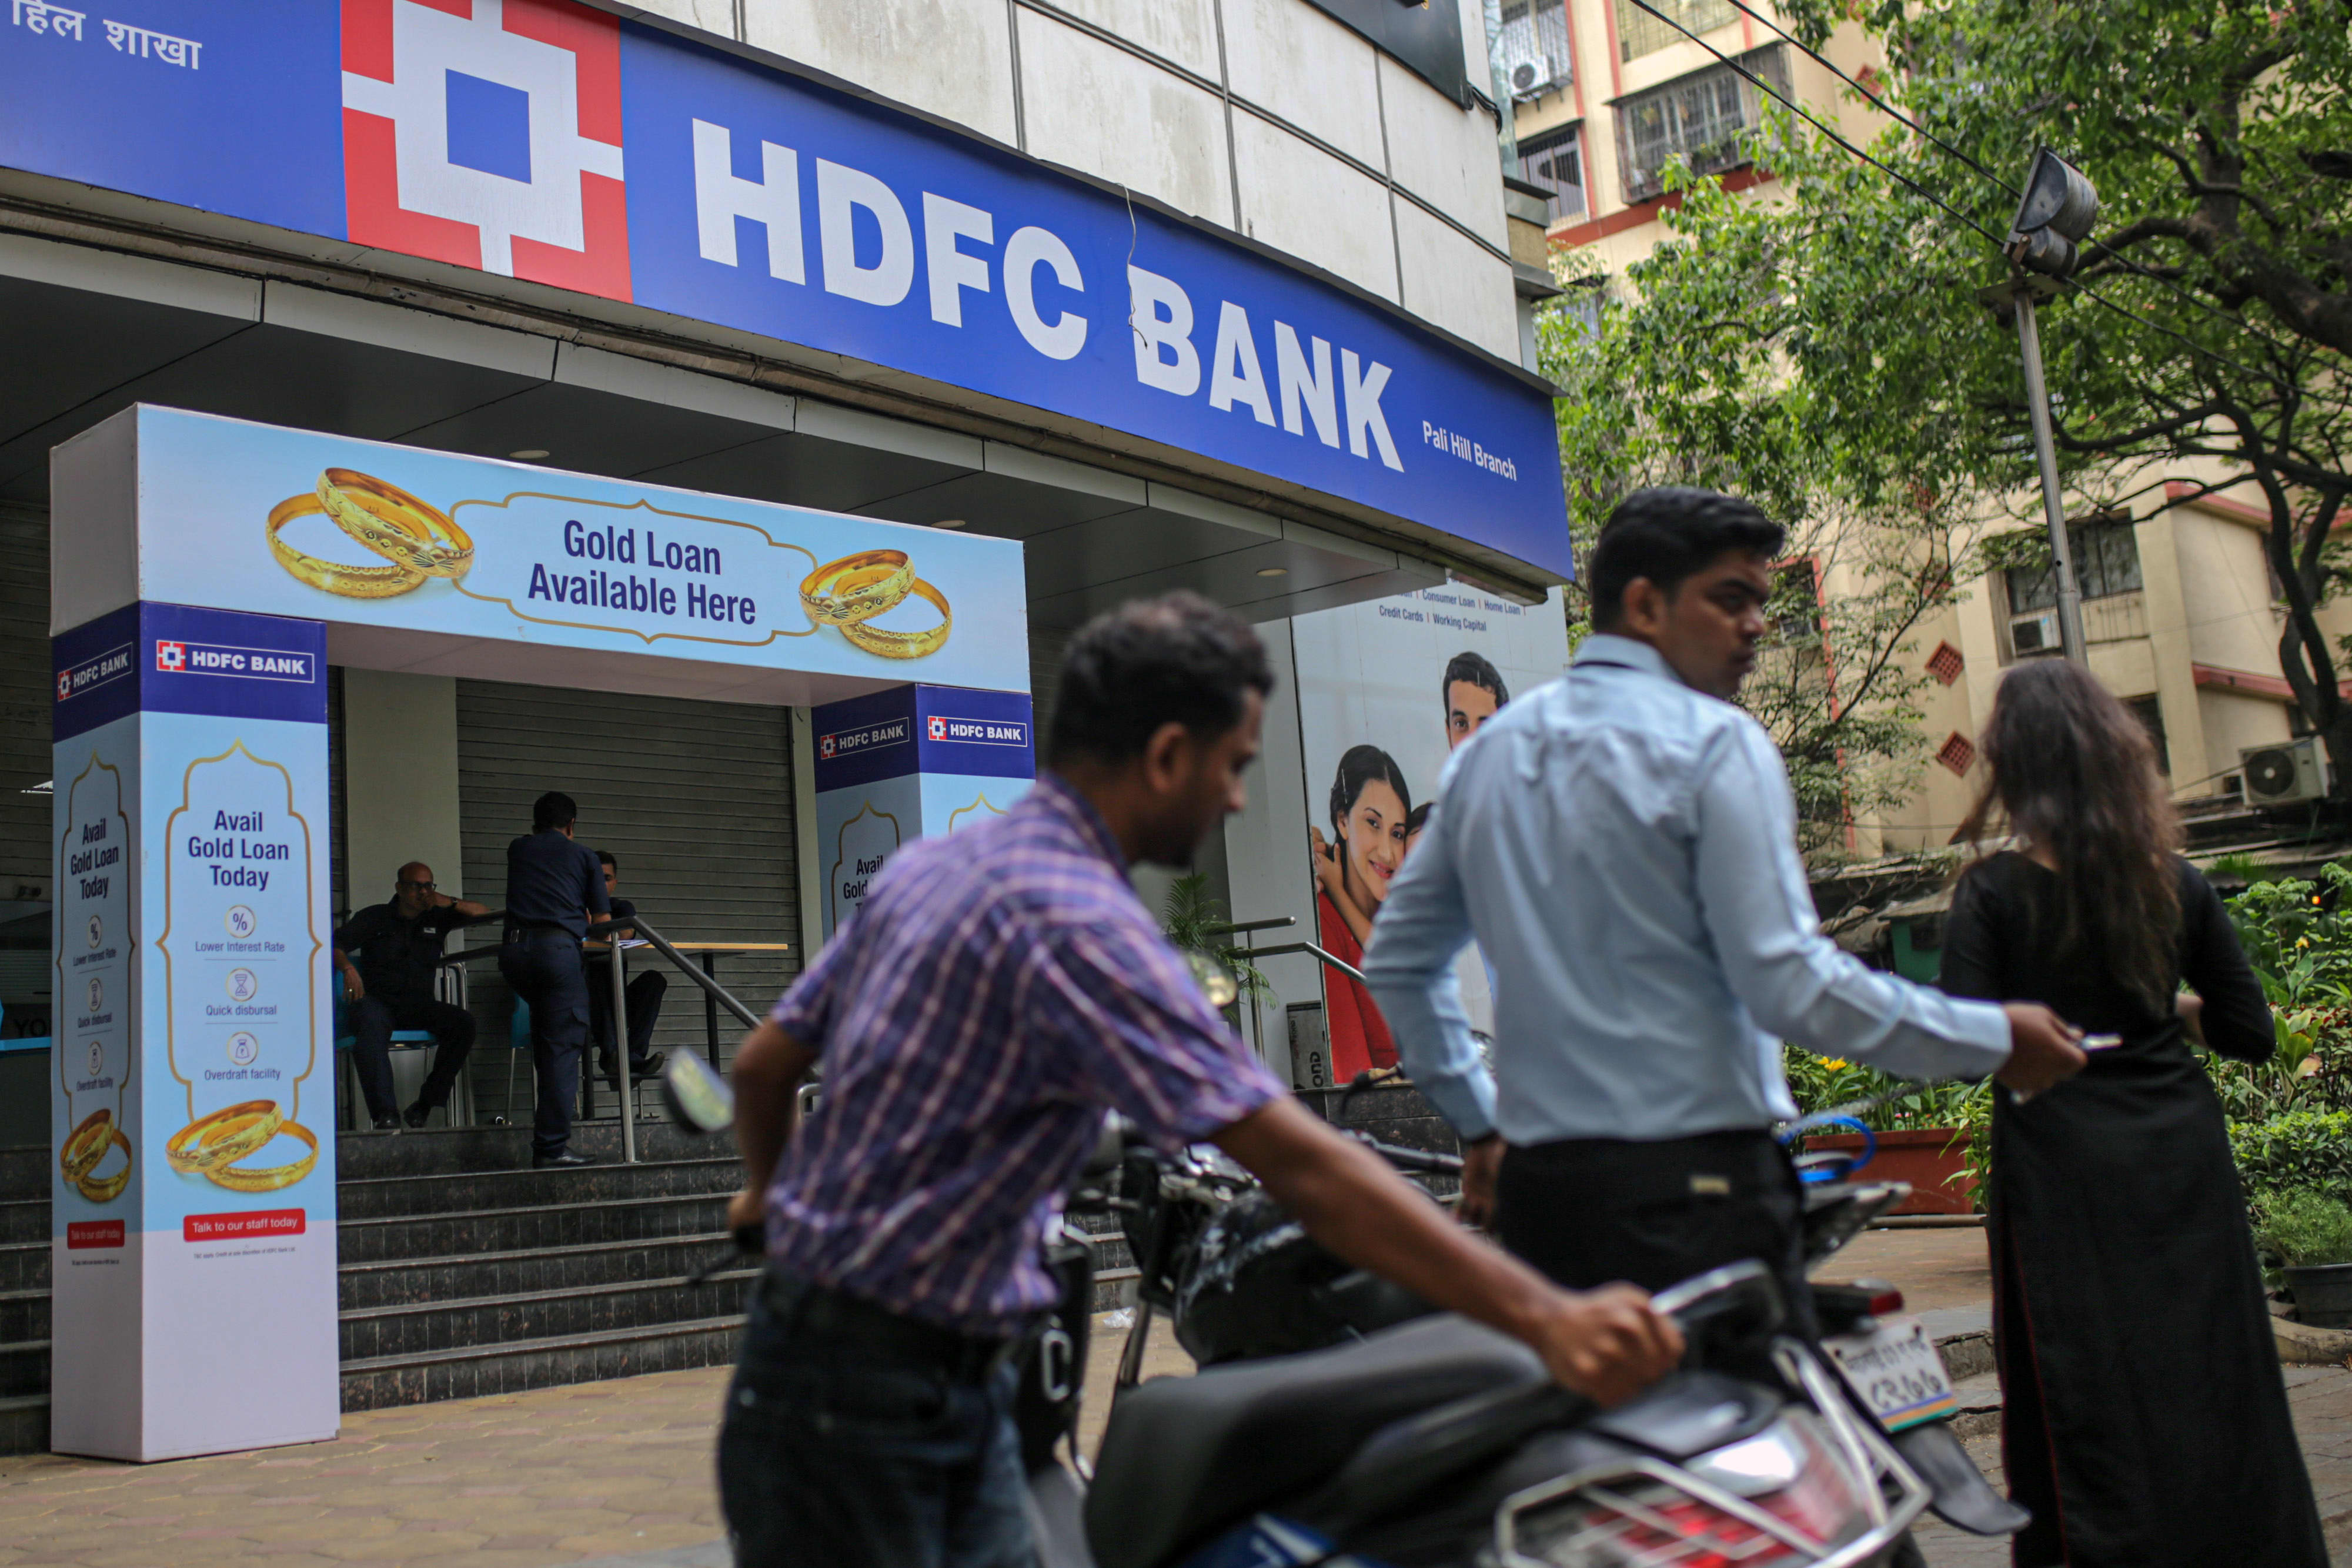 India's HDFC Bank completes $40 billion merger with mortgage lender HDFC